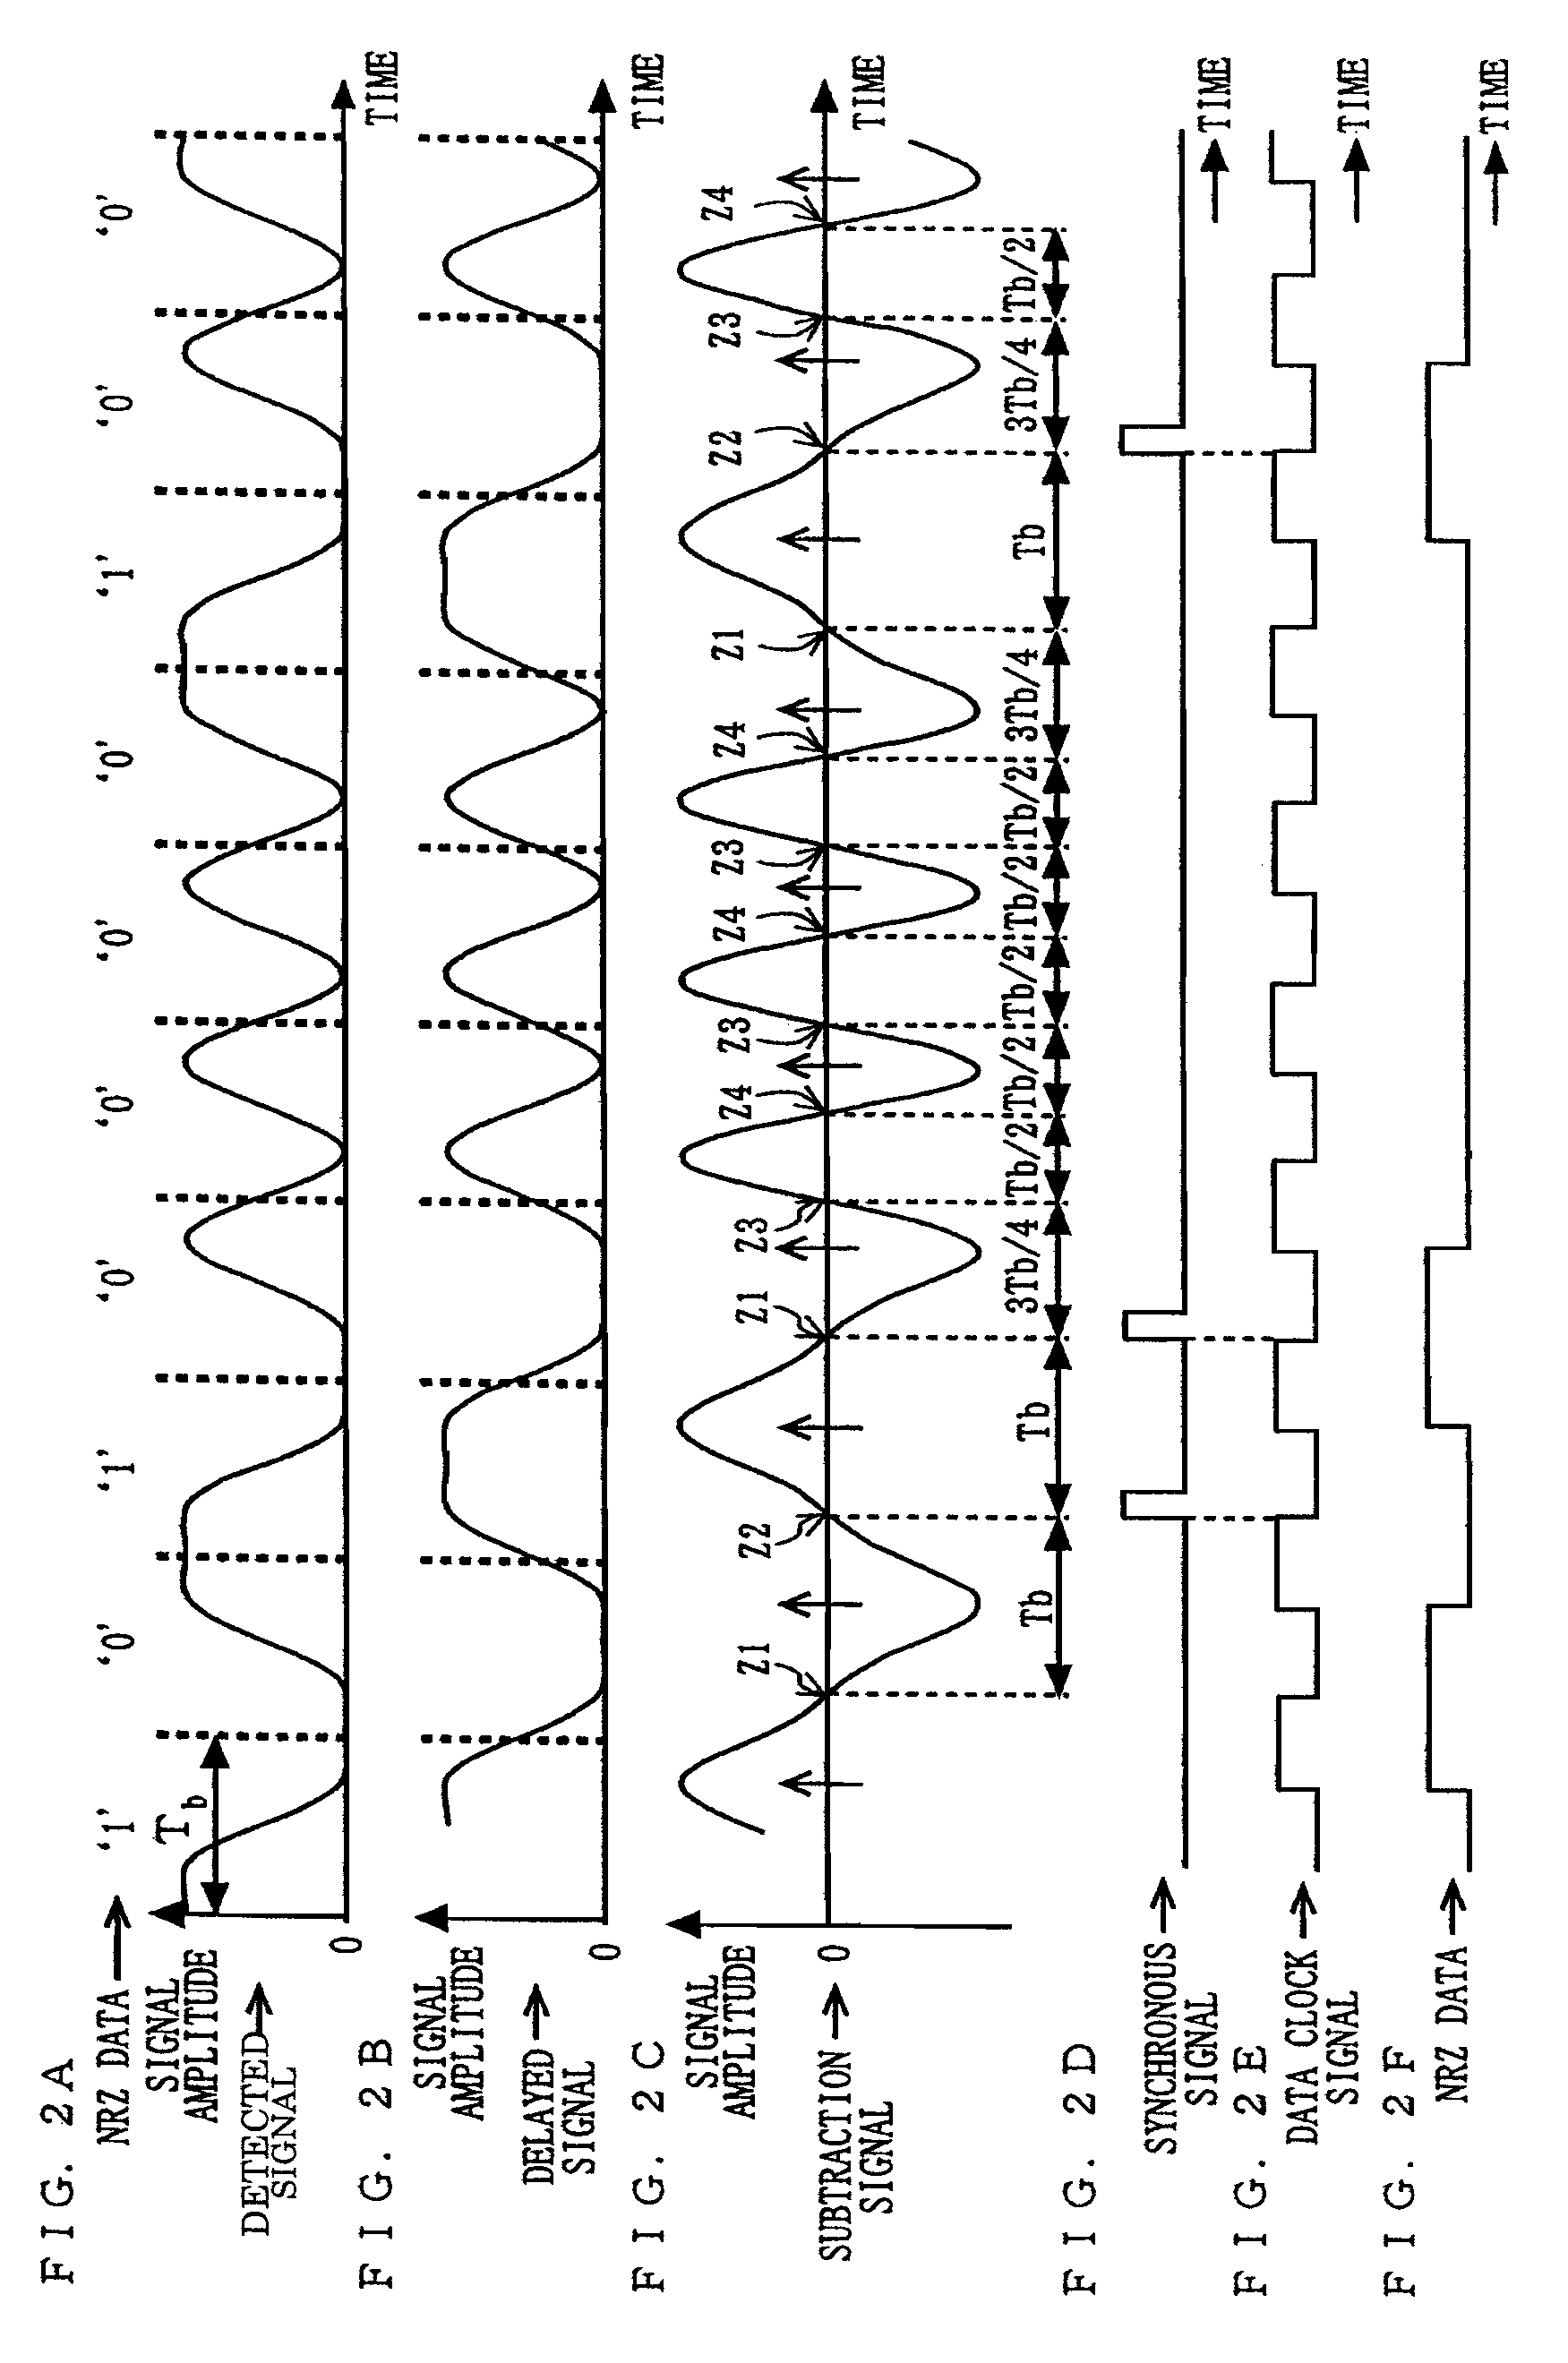 Ask demodulation device and wireless device using the same